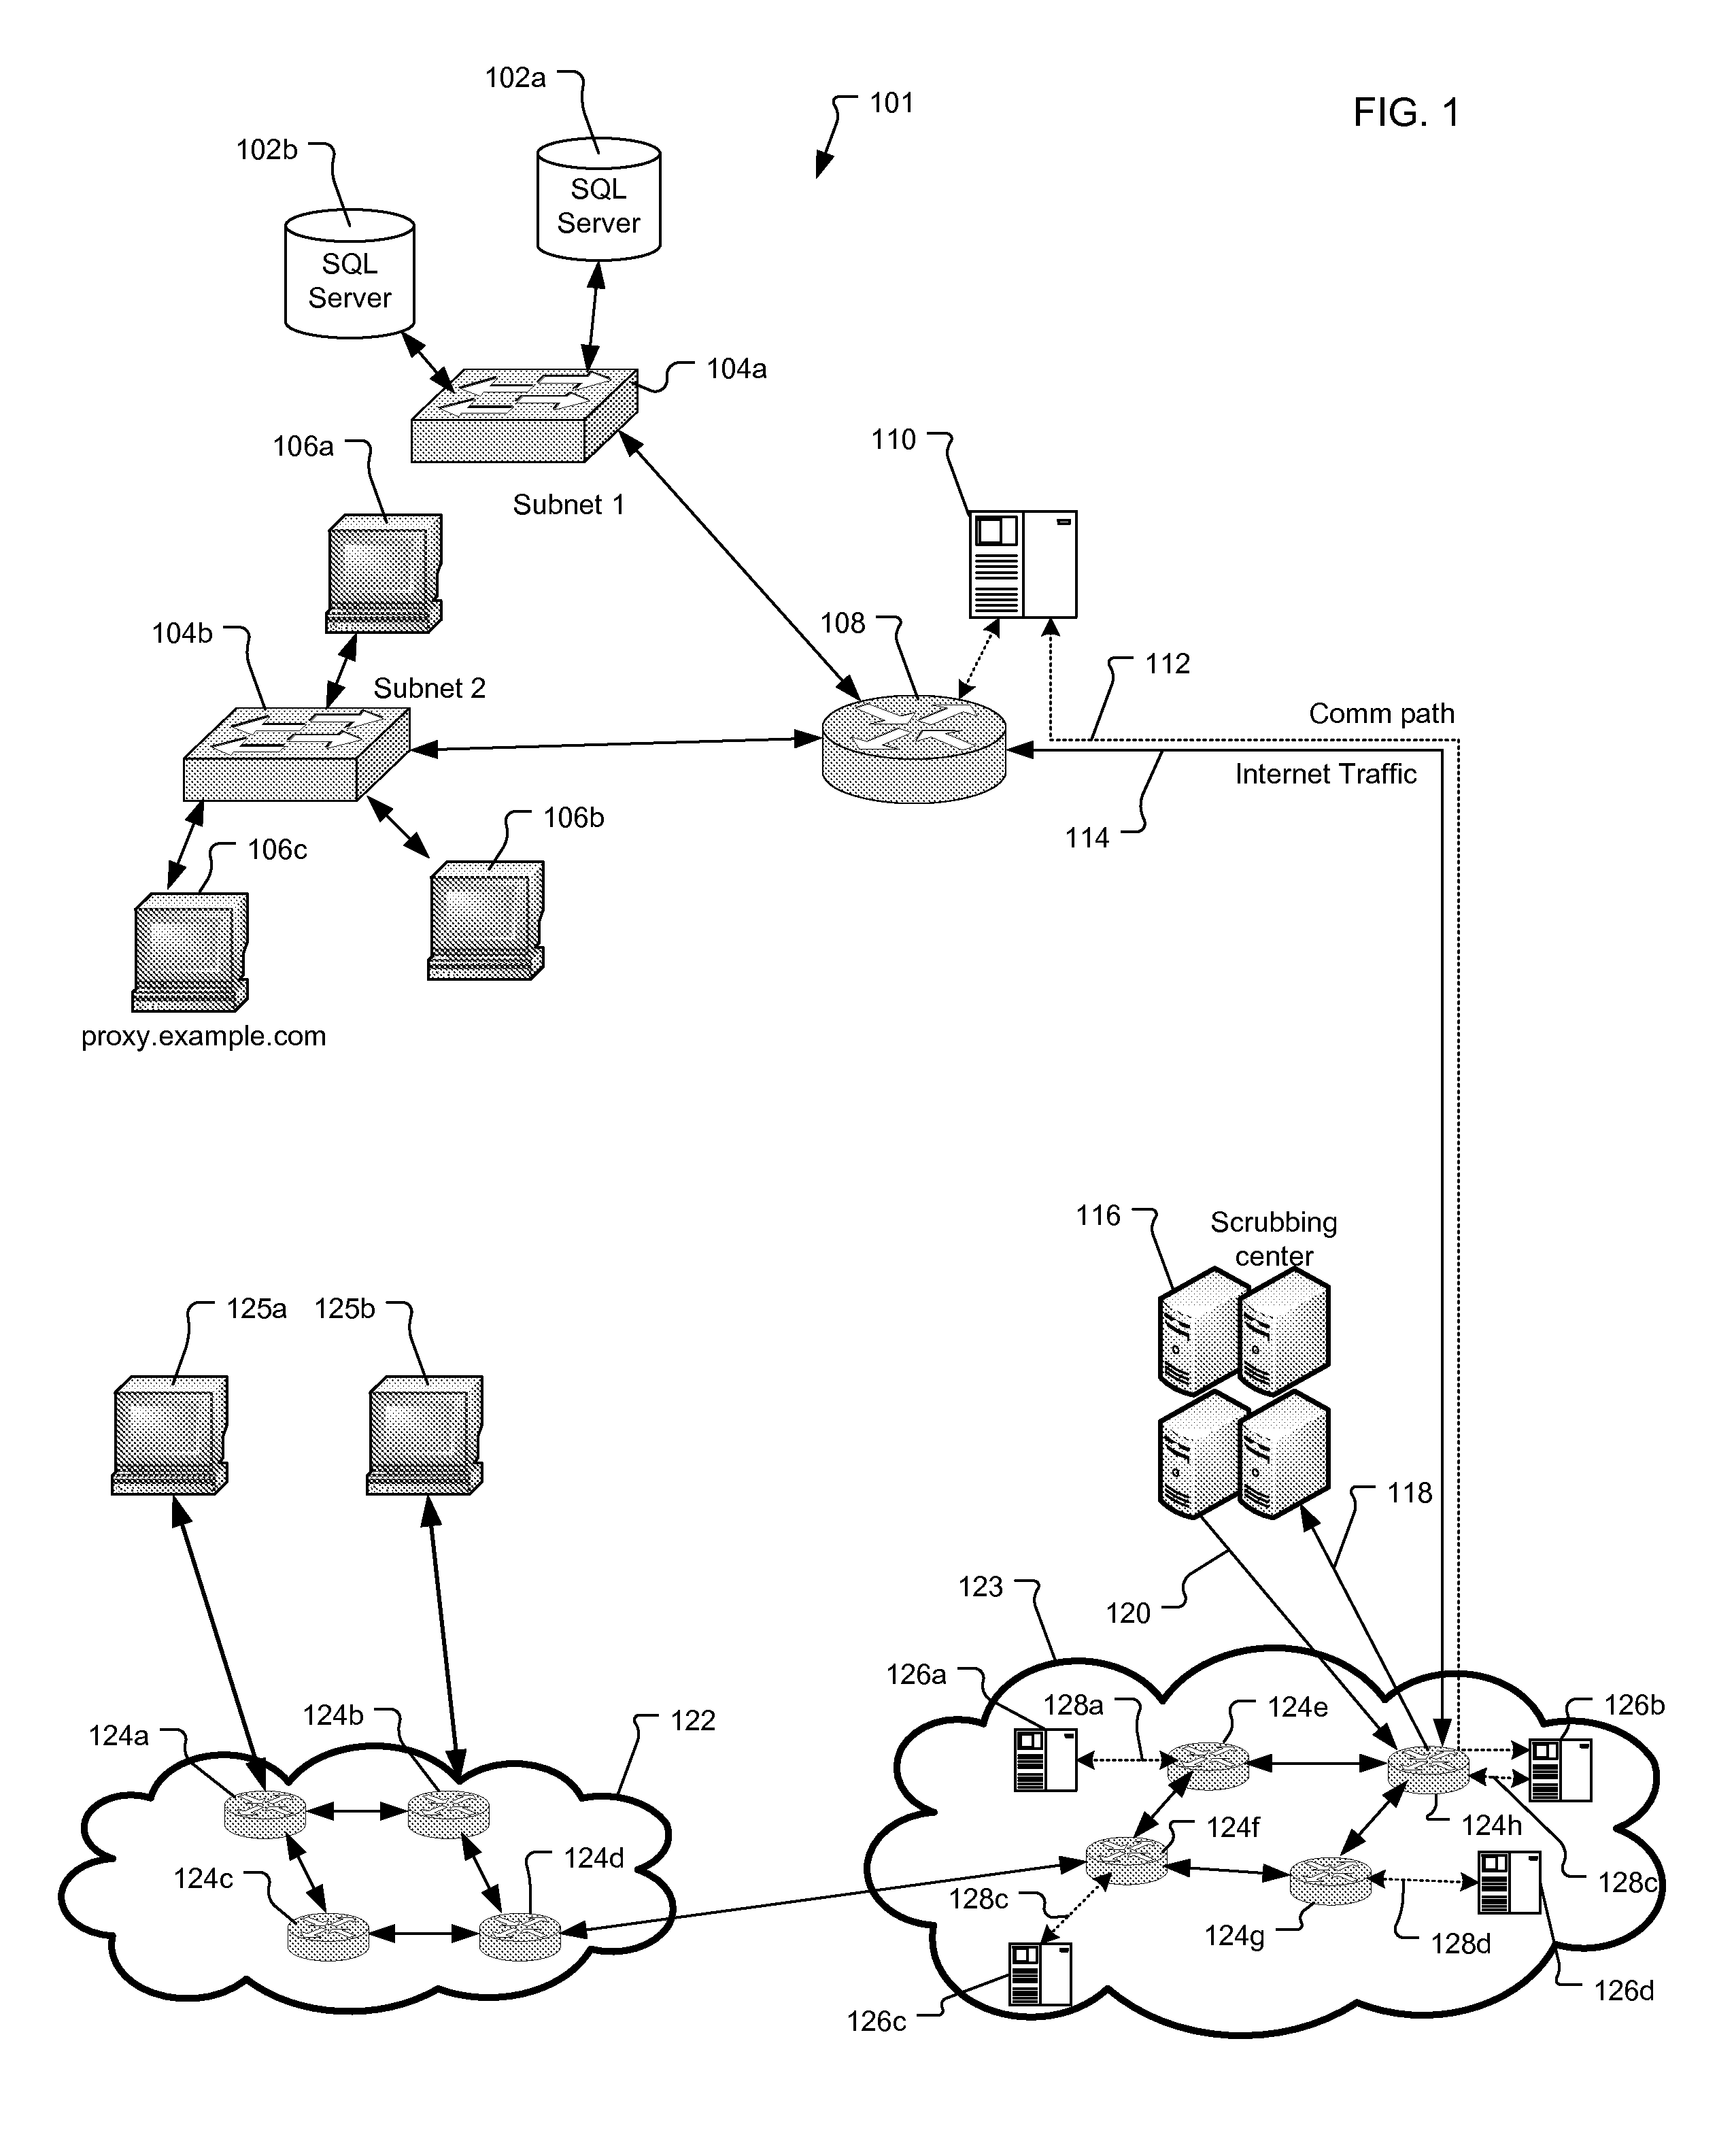 System and method for denial of service attack mitigation using cloud services